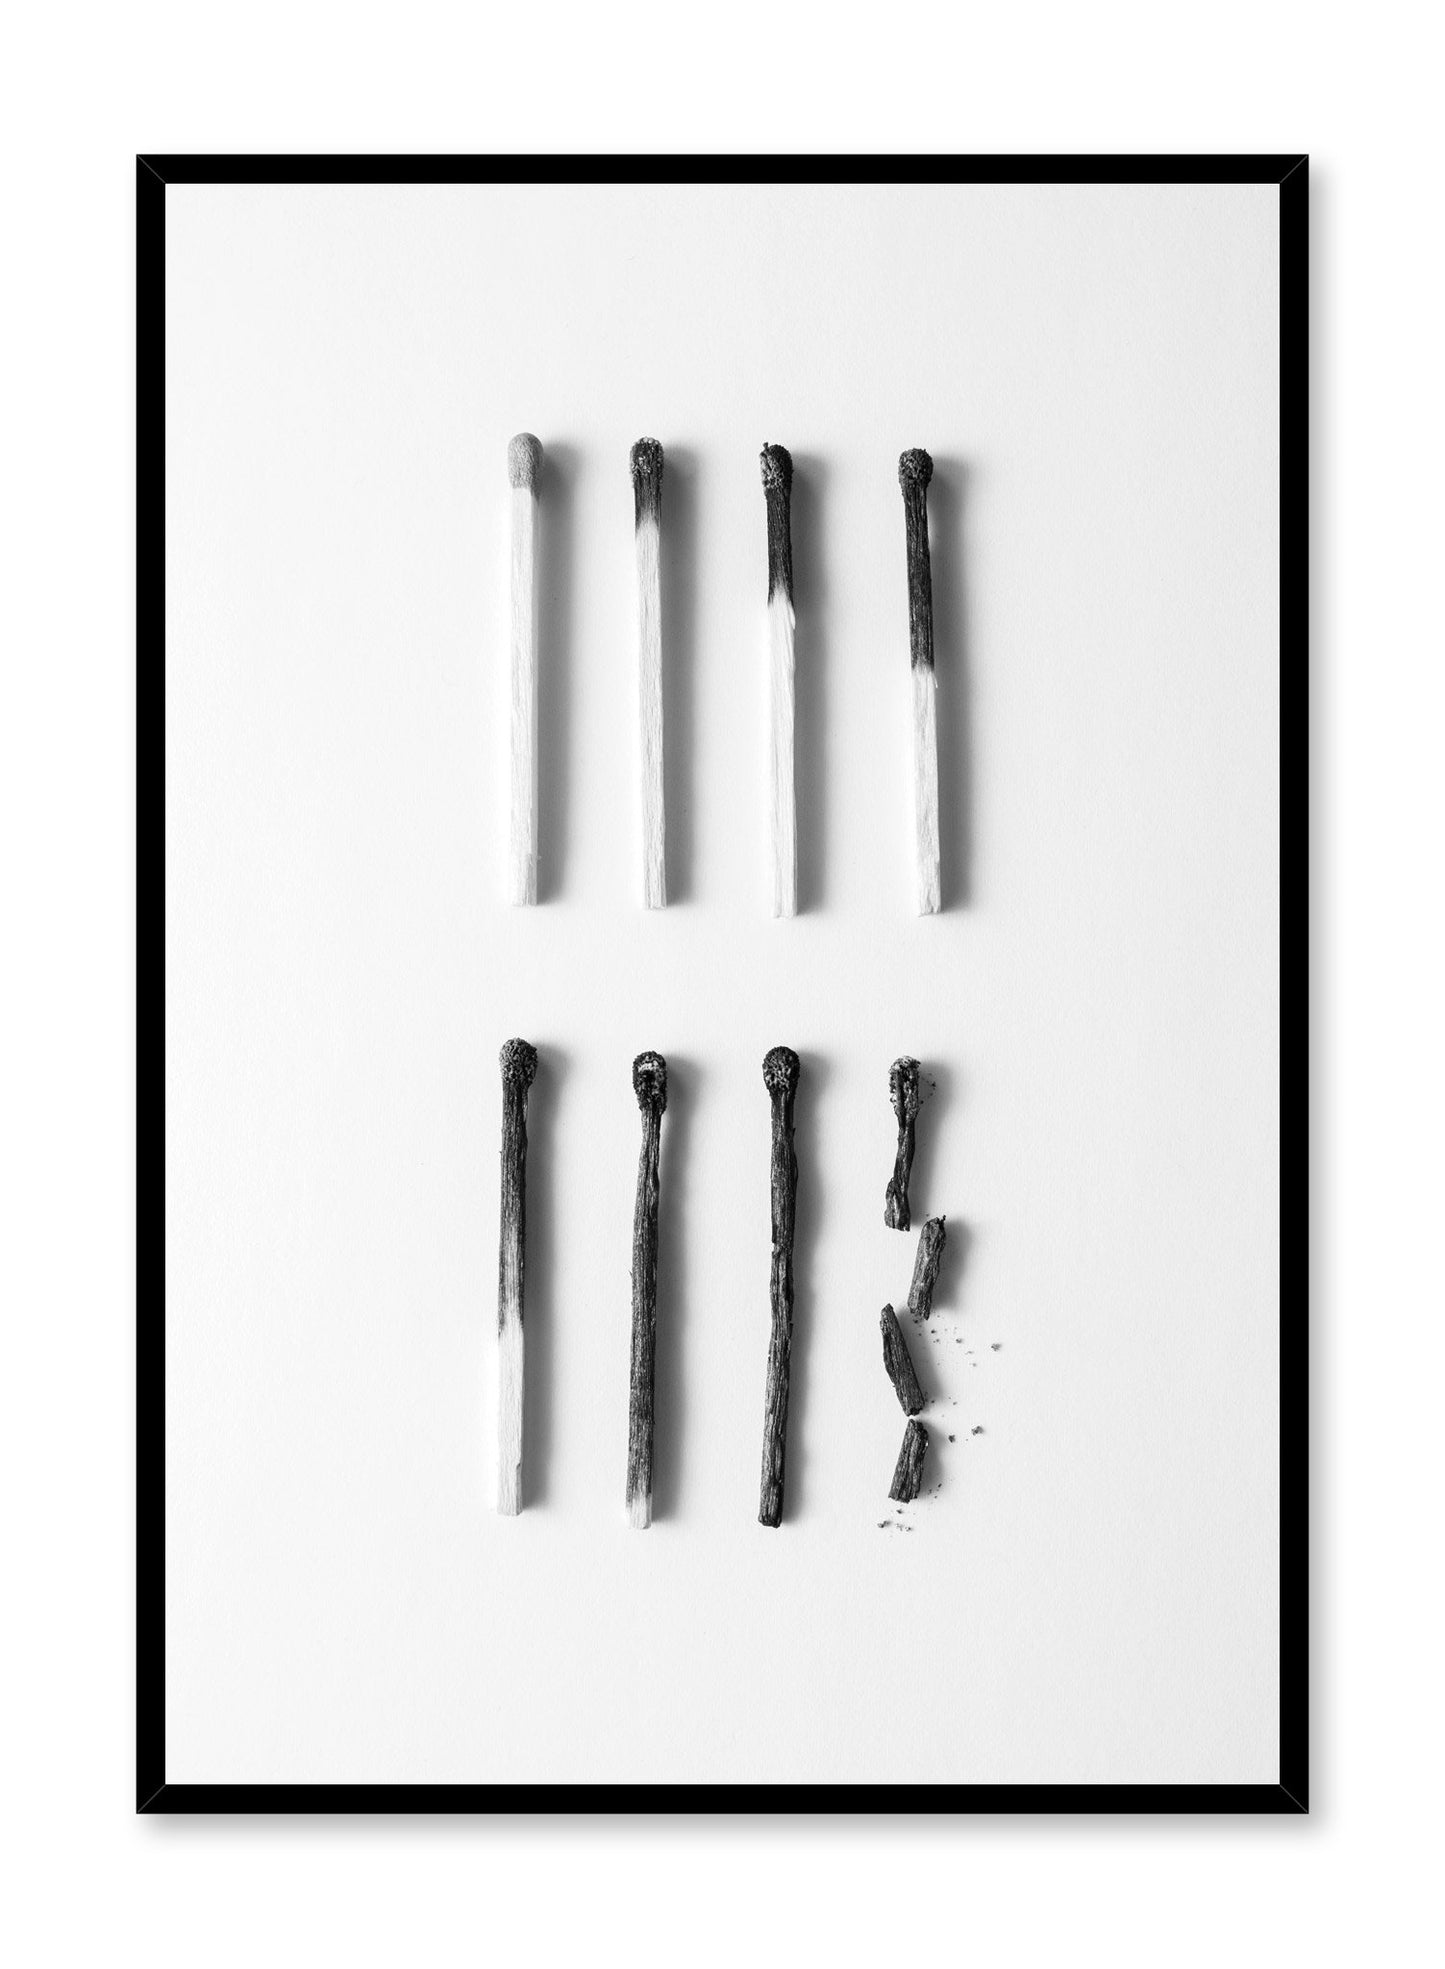 Modern minimalist poster by Opposite Wall with black and white photography of burned matches